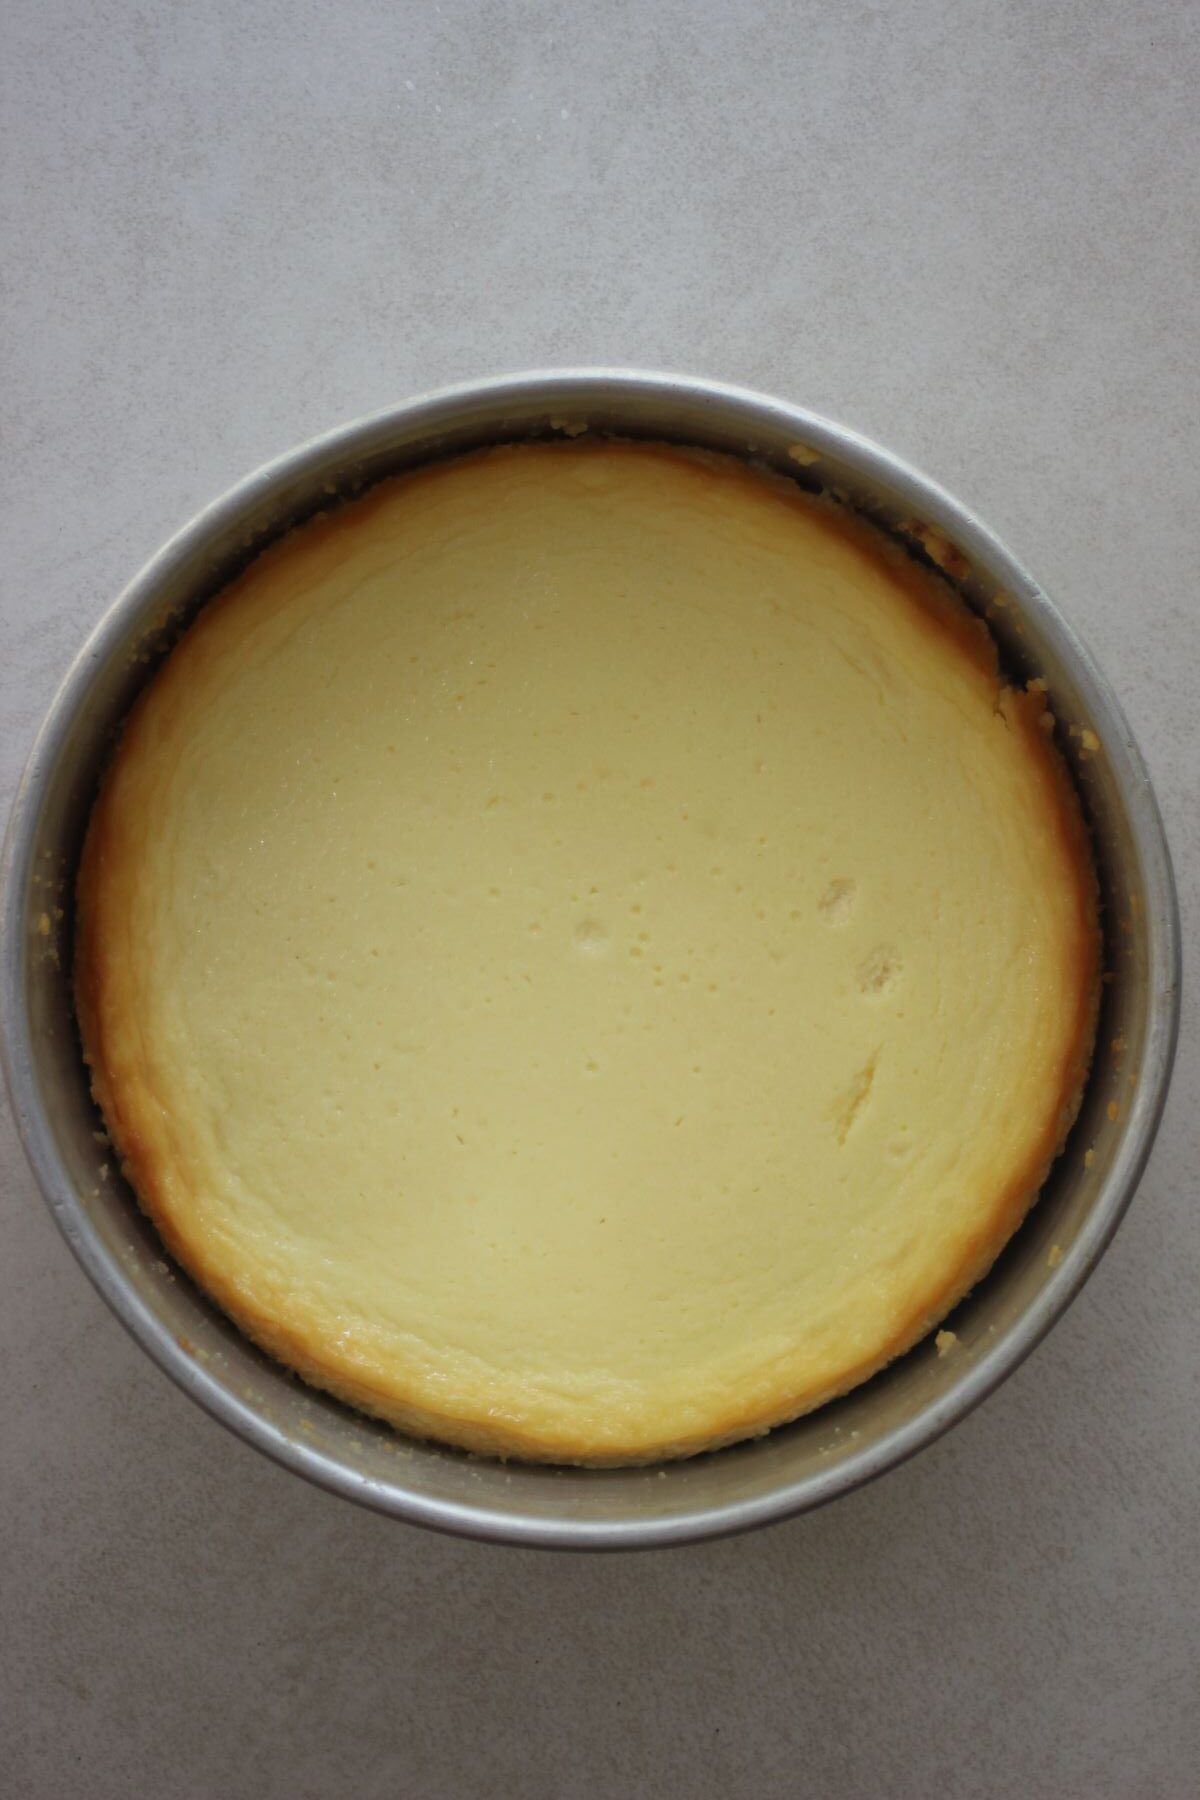 Cooked white chocolate cheesecake in the springform pan seen from above.